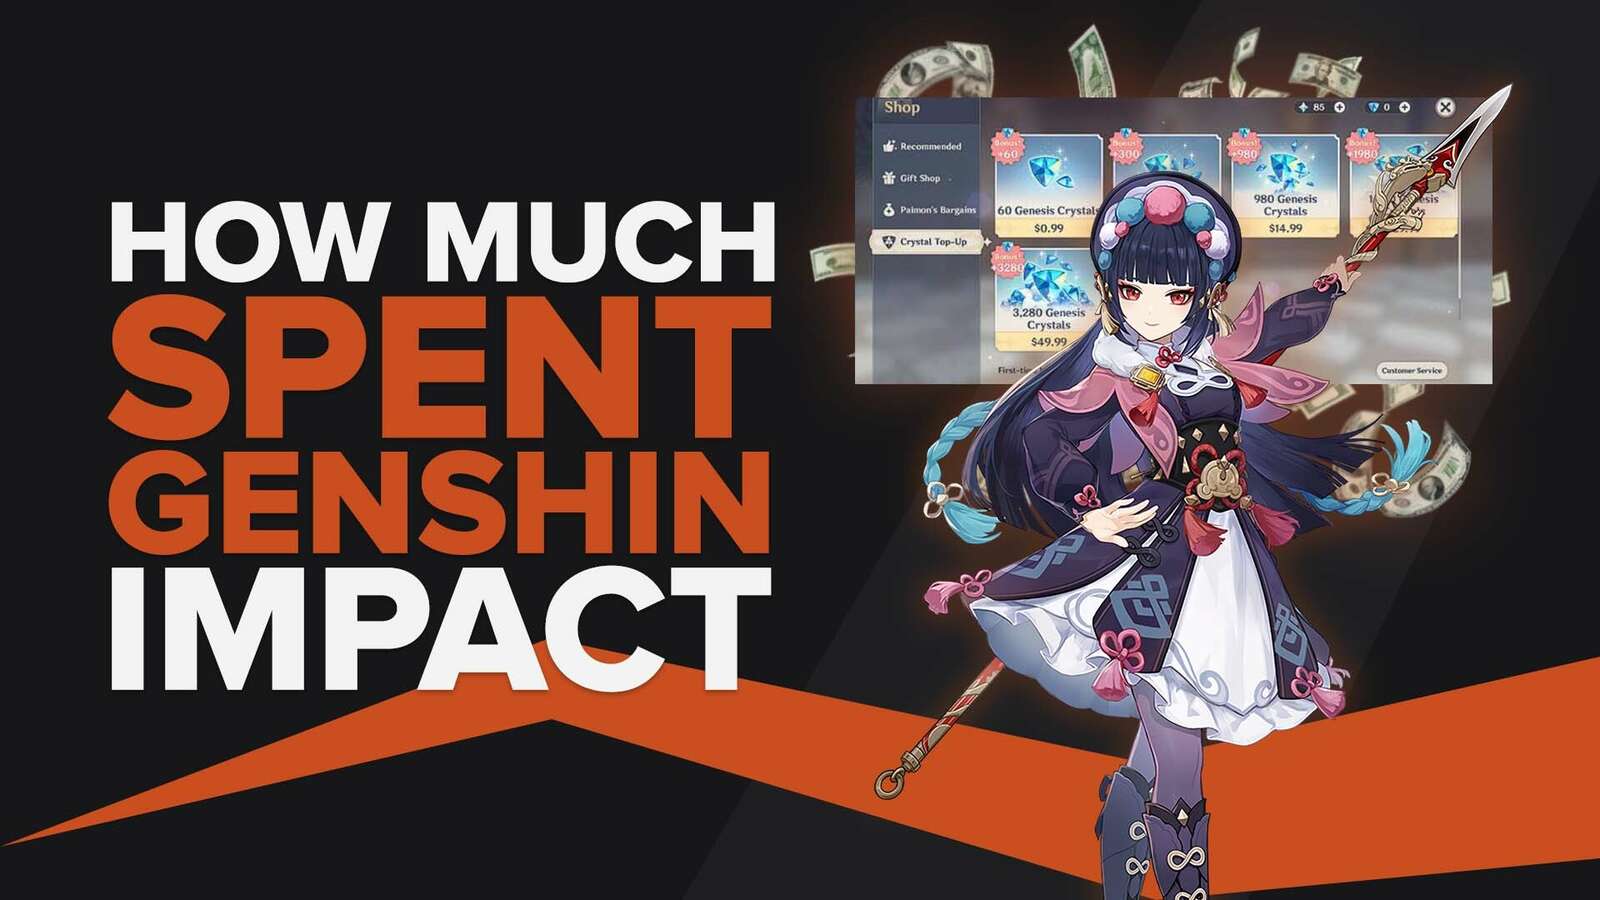 How To Check How Much Money I Spent on Genshin Impact?